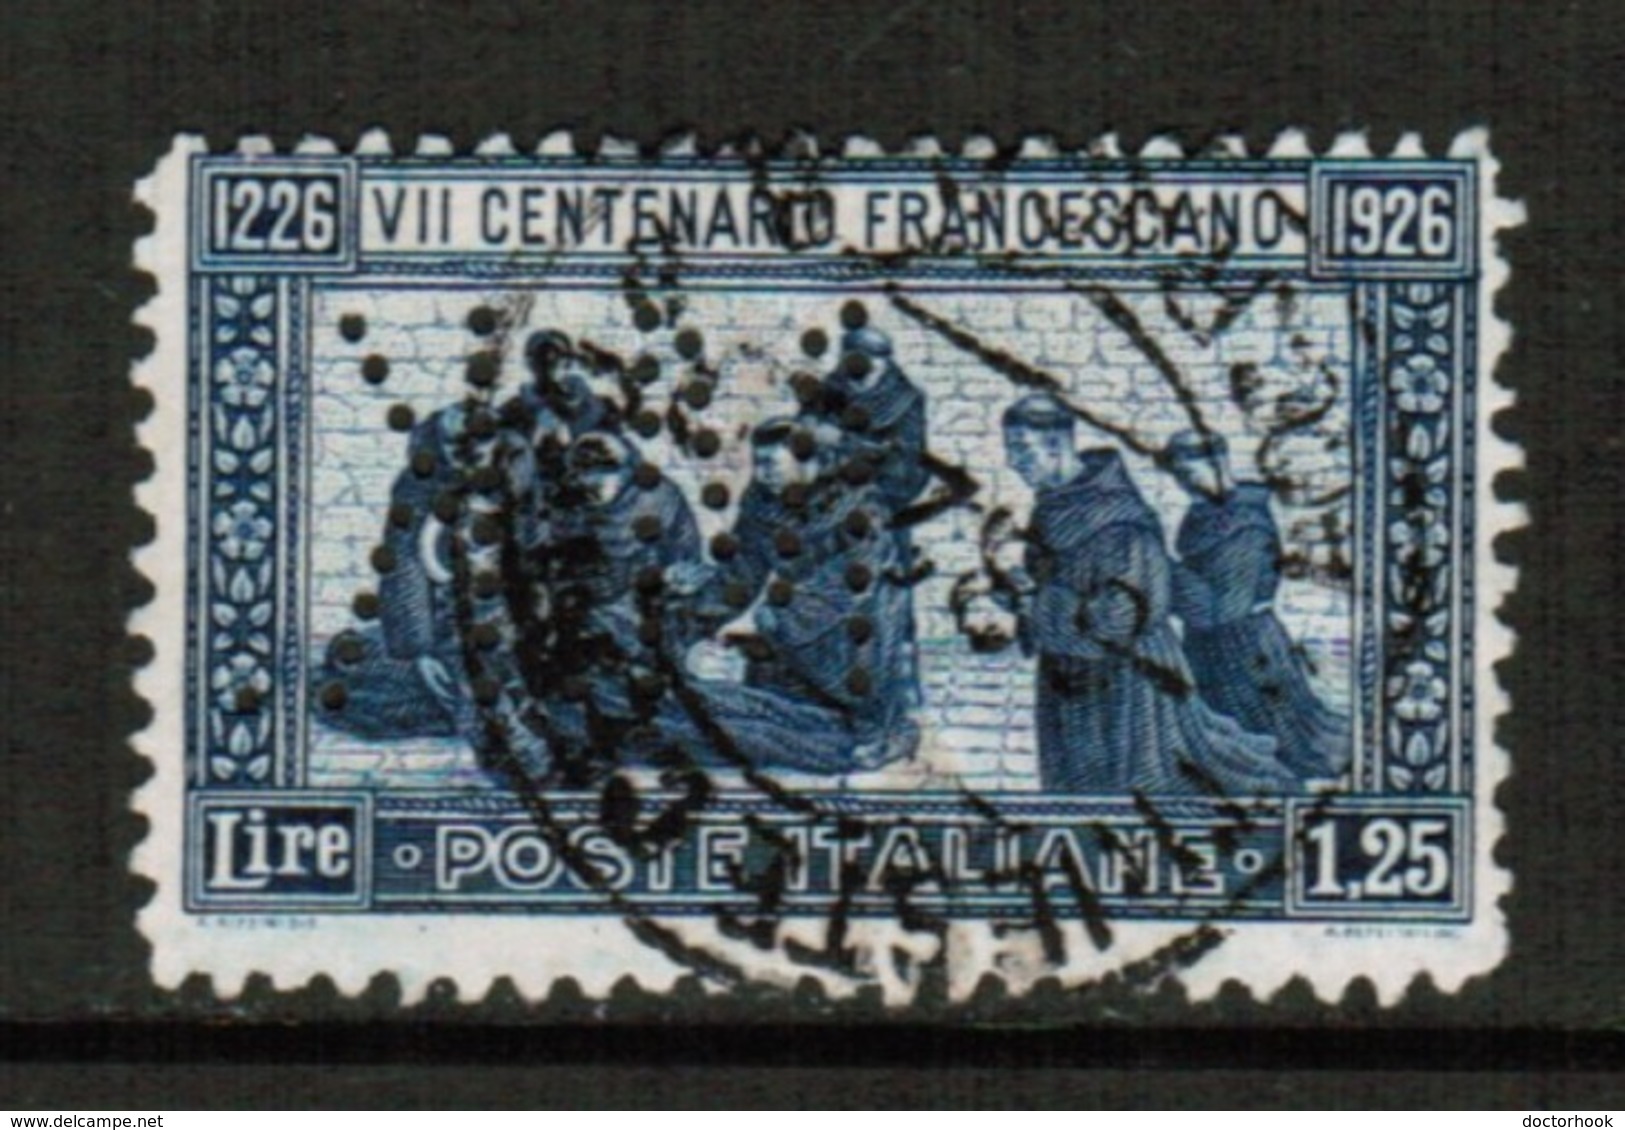 ITALY  Scott # 182 F-VF USED PERFIN  (Stamp Scan # 516) - Afgestempeld